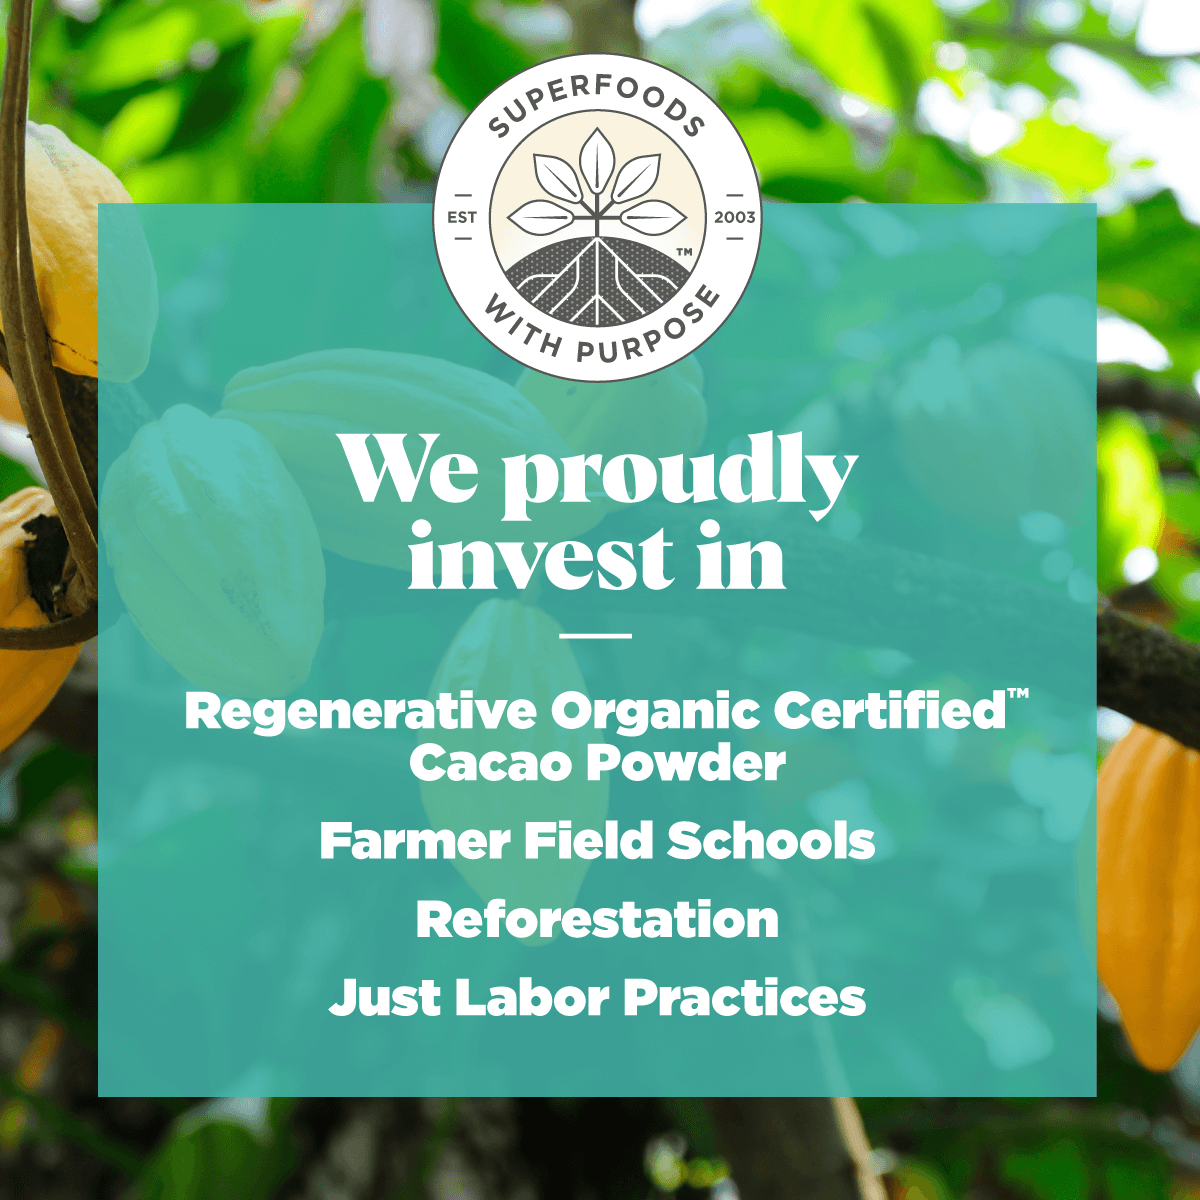 We proudly invest in Regenerative Organic Certified Farmer Field Schools, Reforestation, Just Labor Practices.